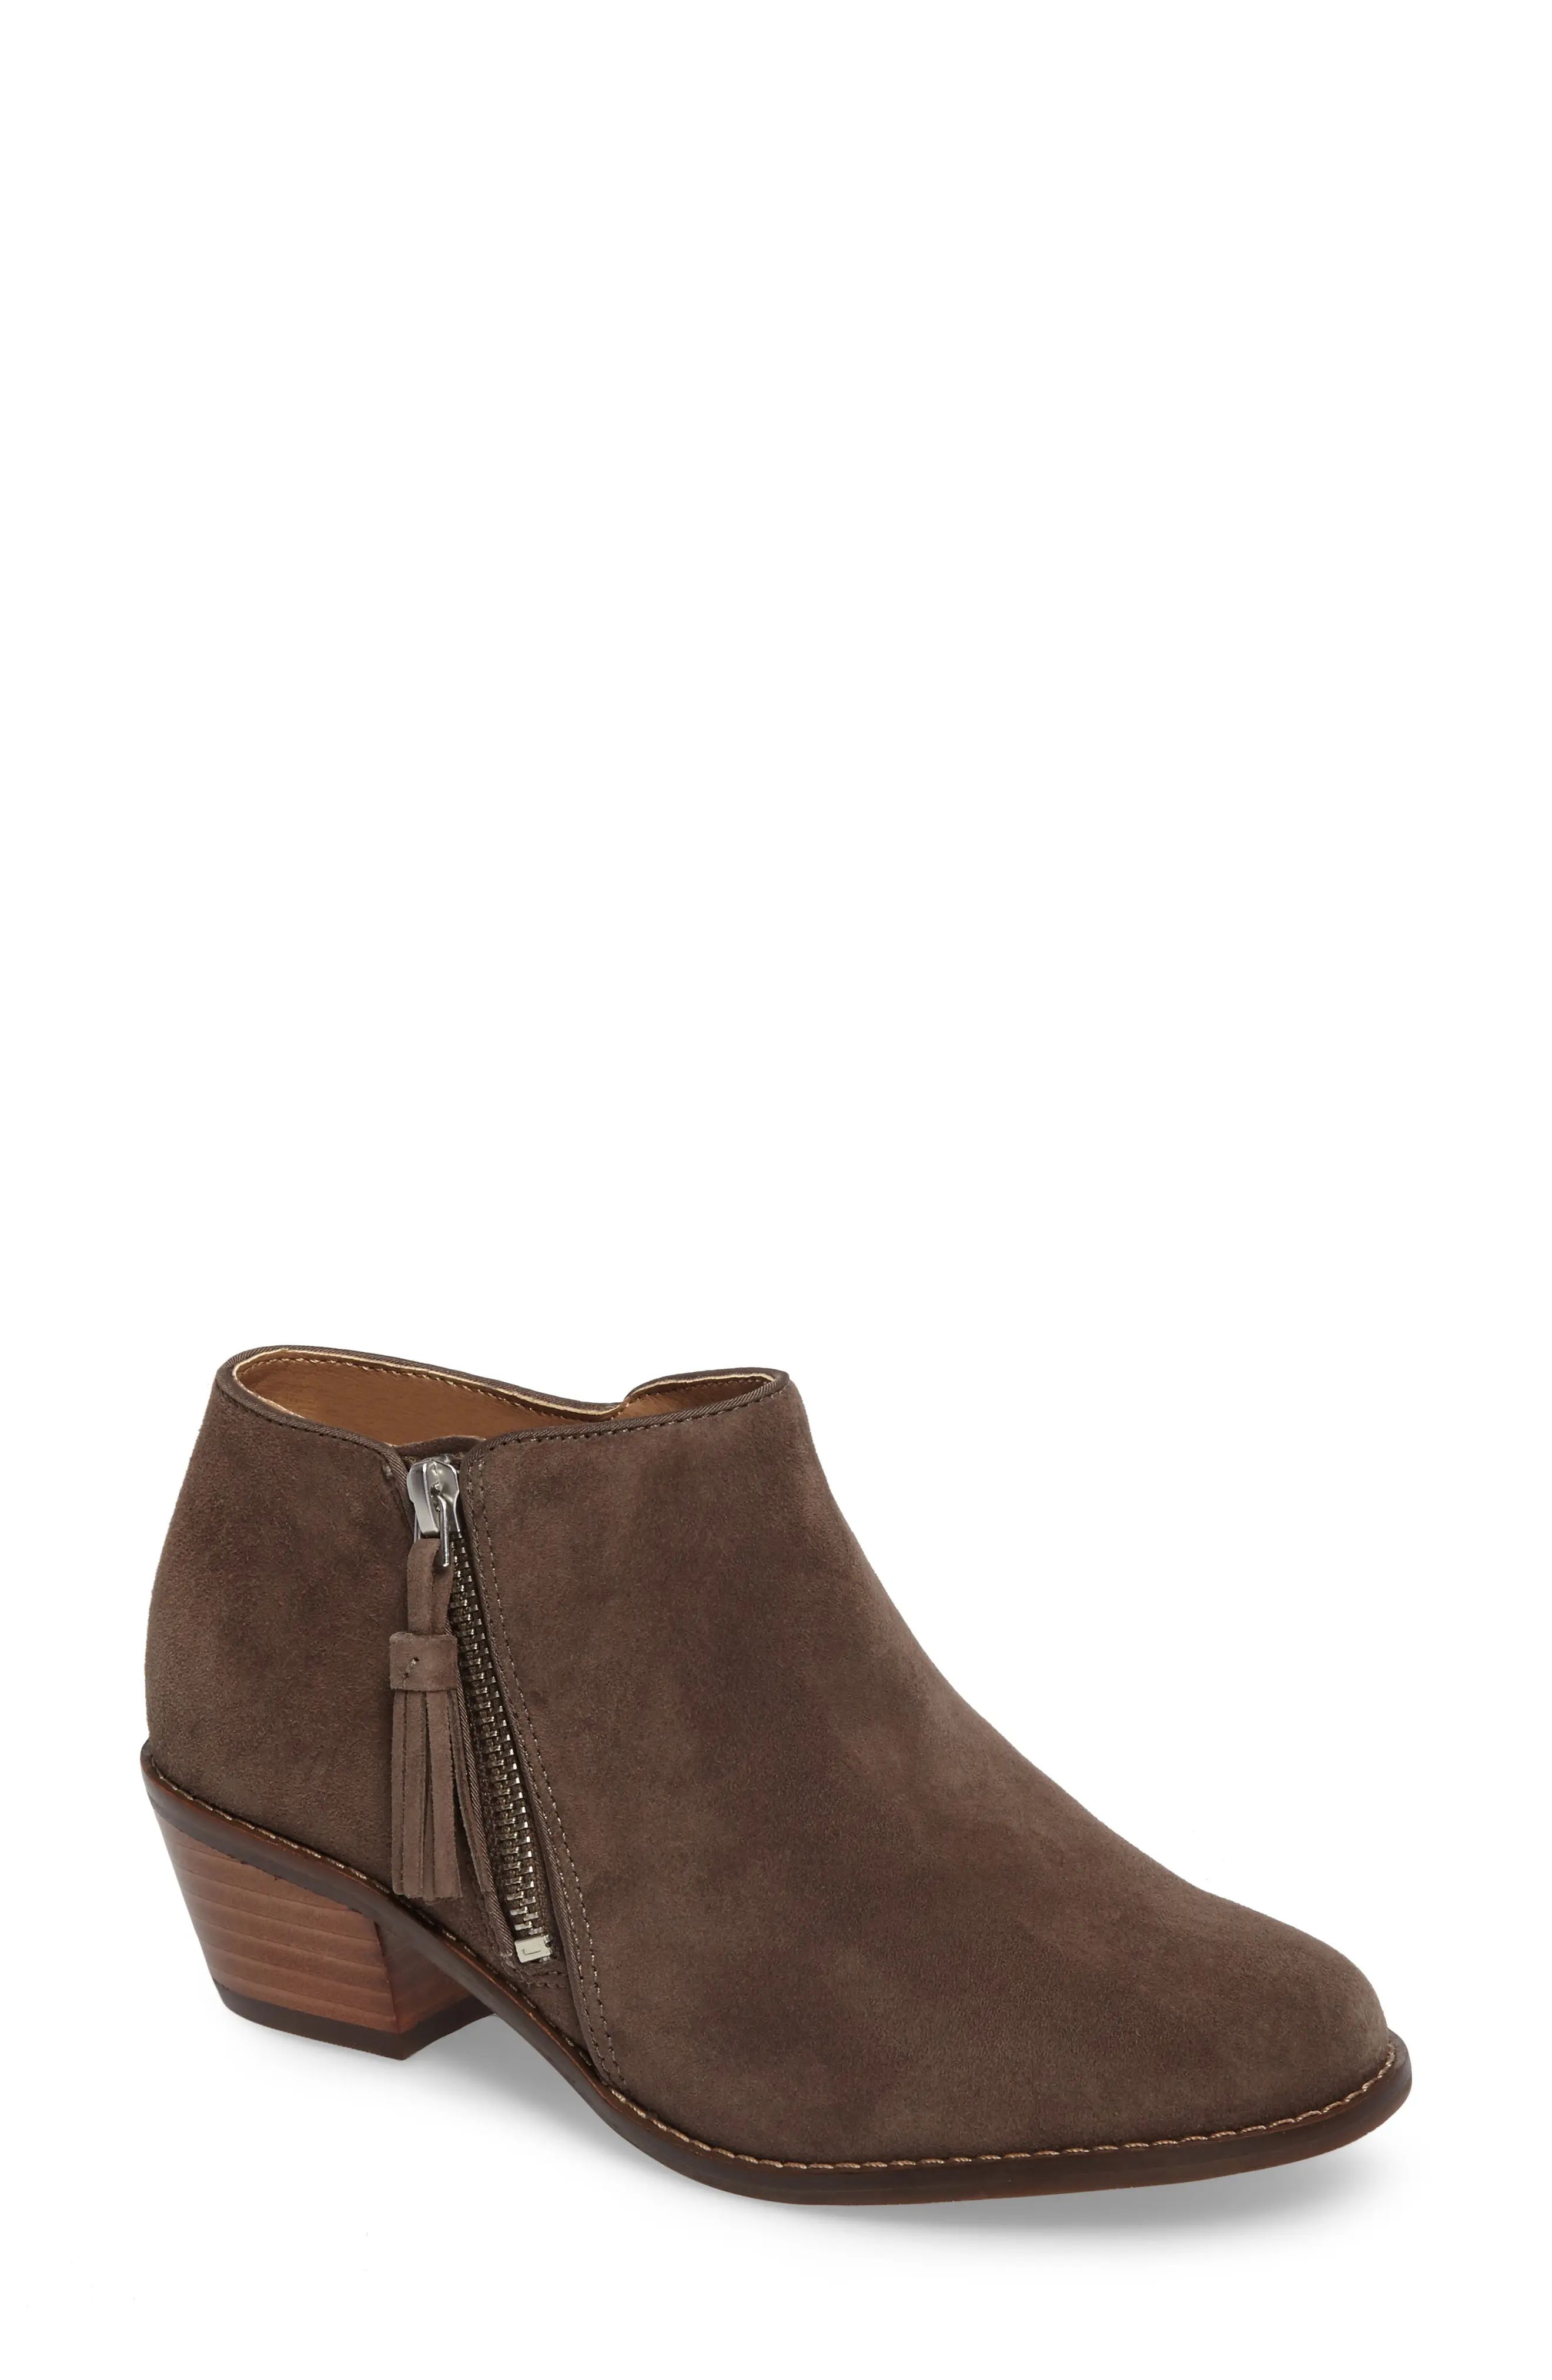 Women's Vionic Serena Ankle Boot, Size 5 M - Grey | Nordstrom